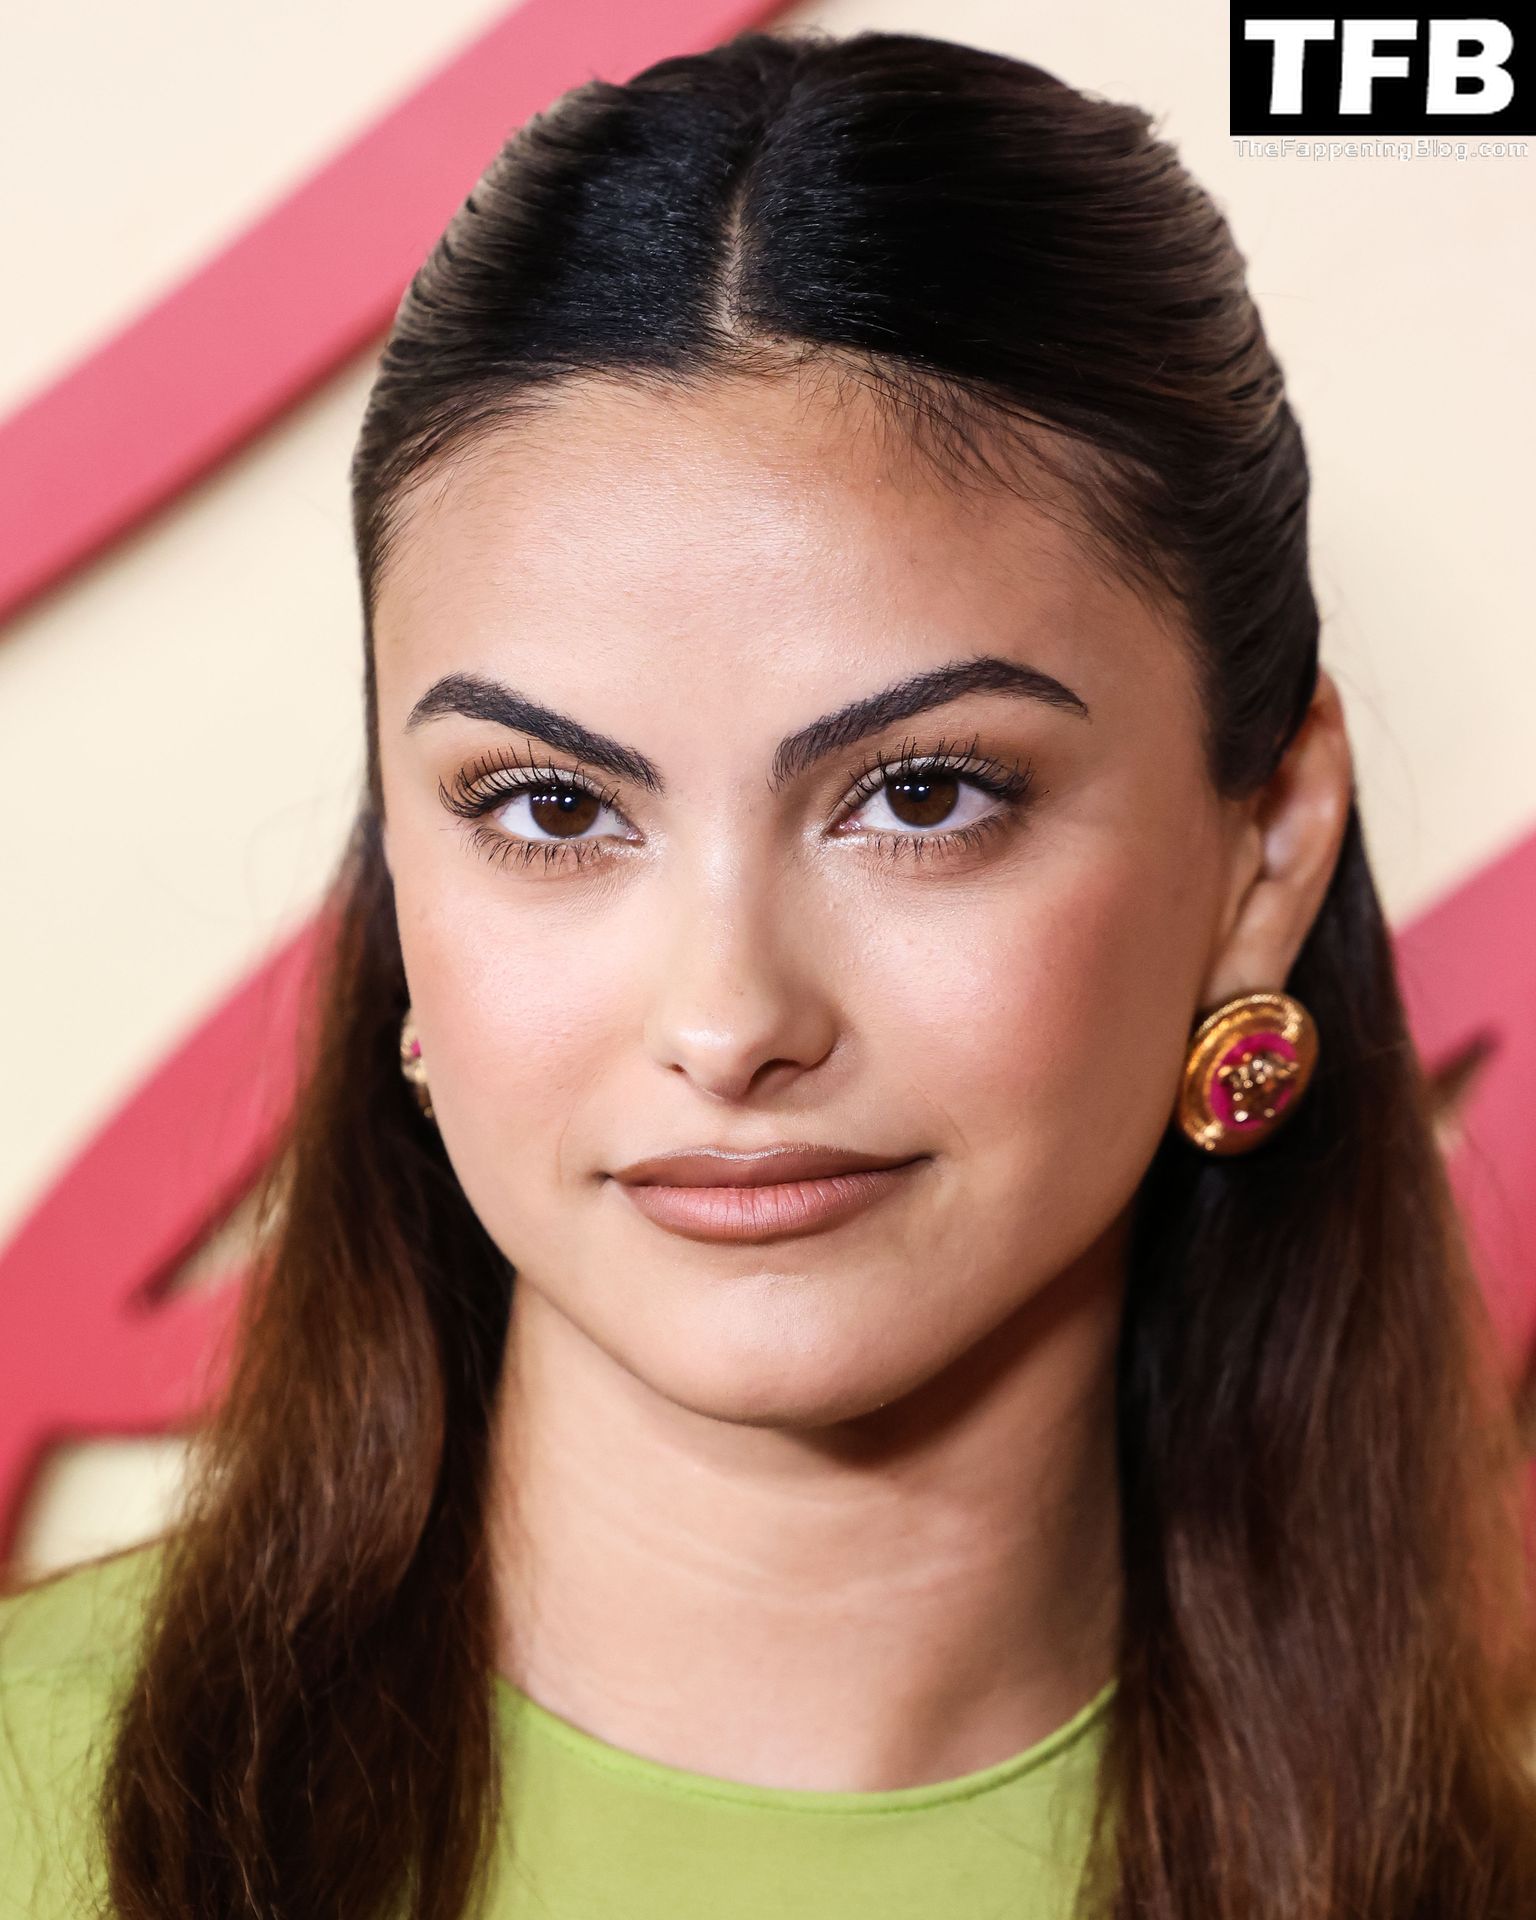 Camila-Mendes-Sexy-The-Fappening-Blog-5-1.jpg